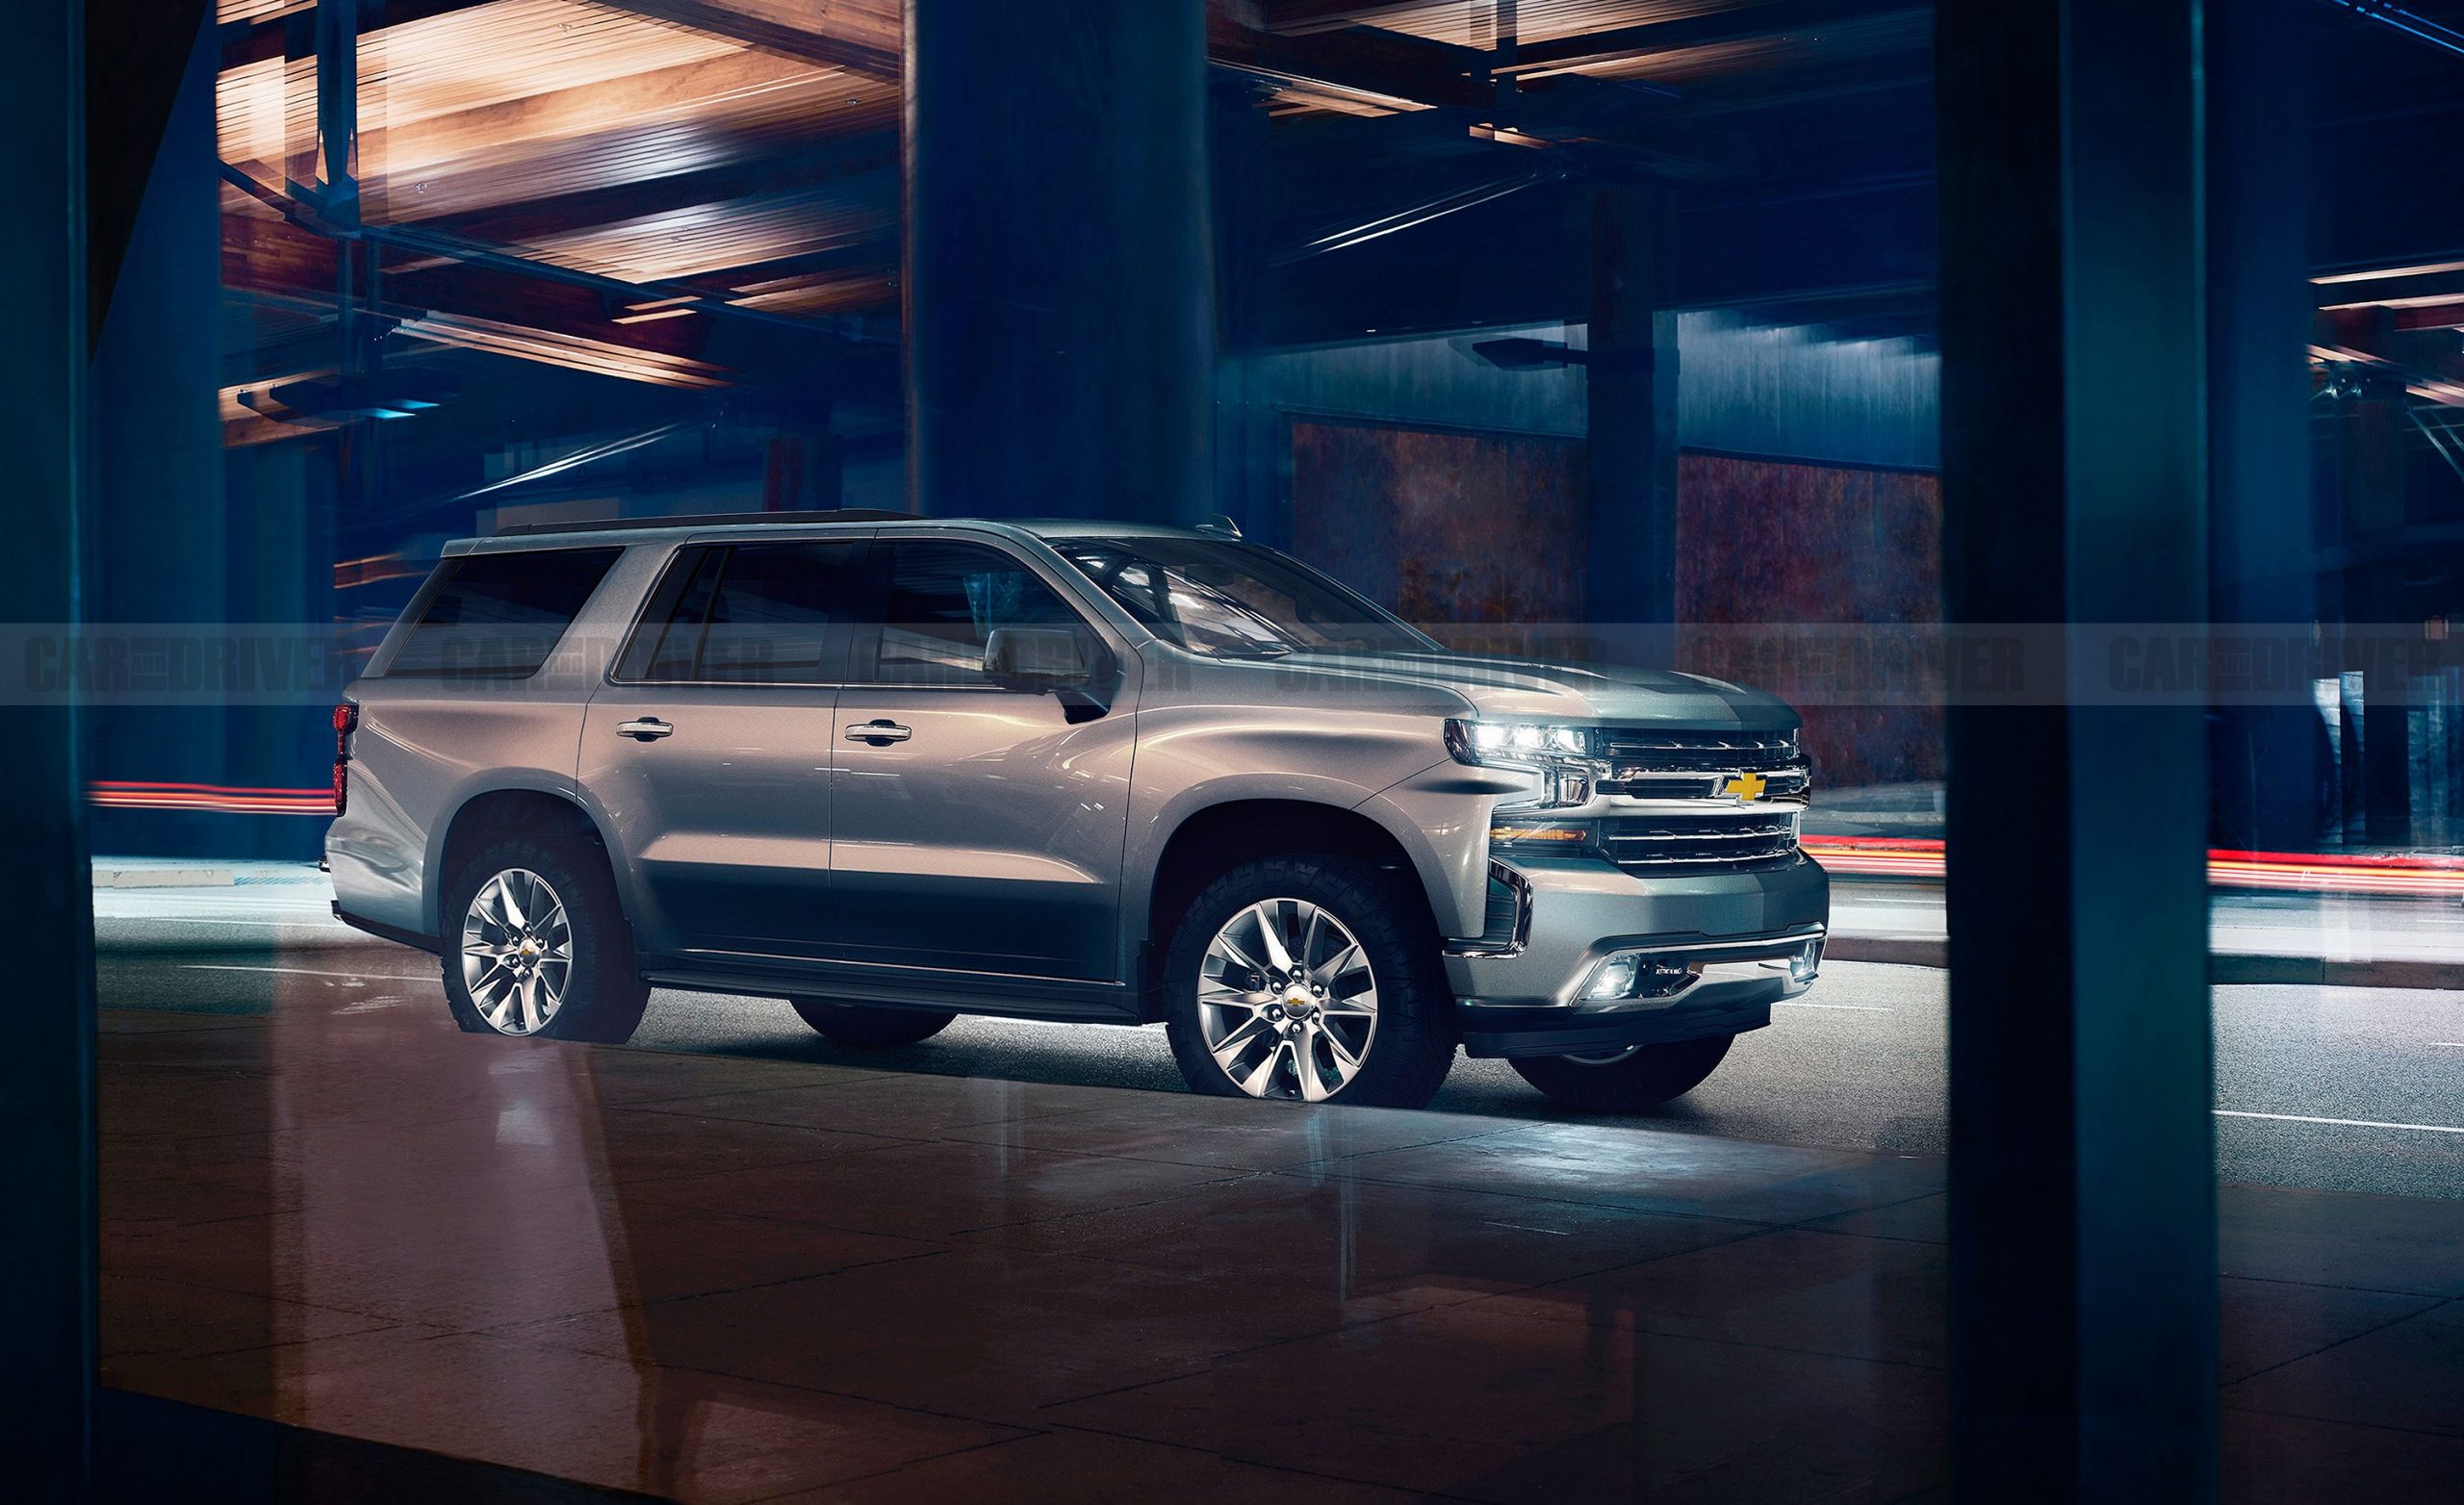 2022 Chevy Tahoe Lt Price, Specs, Review | 2022 Chevy